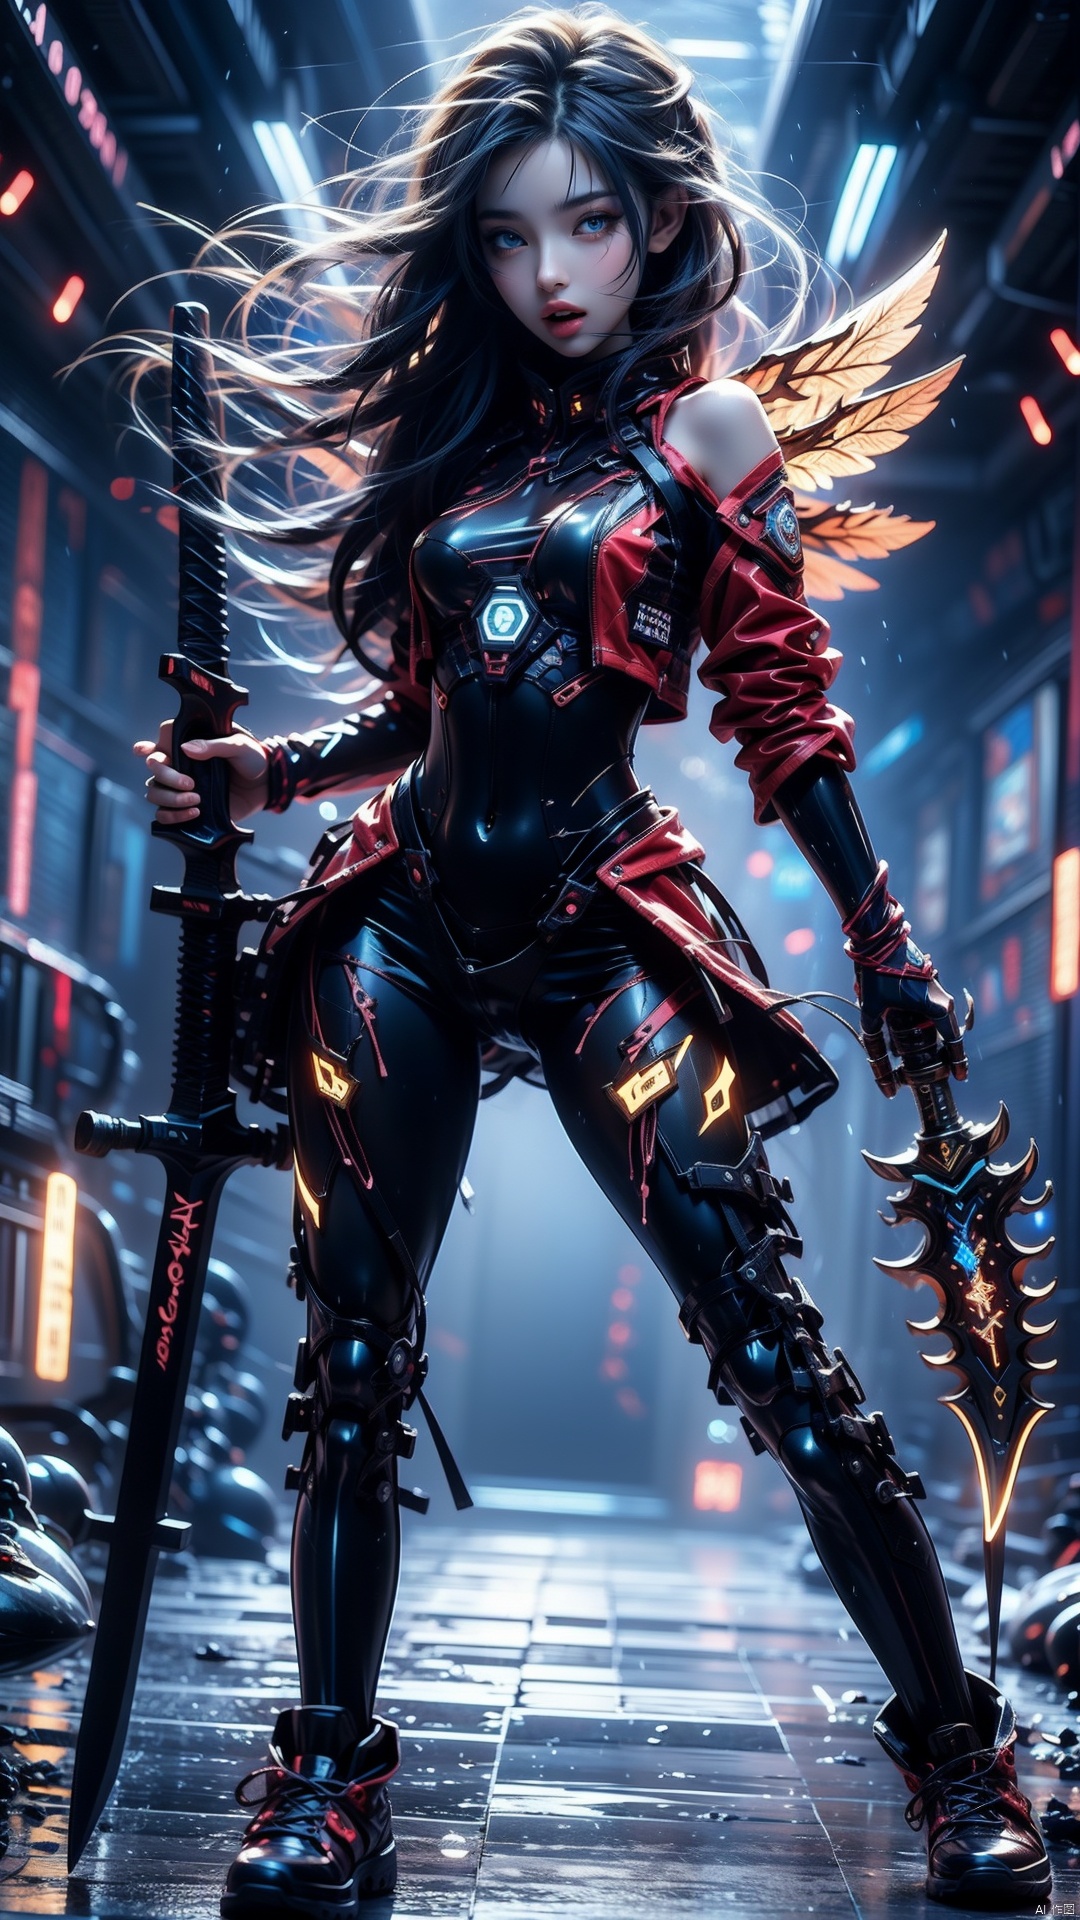 sunrise stance, (holding weapon:1.3),yellow eyes,half closed eyes,Red coat, blue eyes,evil,red hair,long hair,messy hair,black full bodysuit,serious,open mouth,ruins,sword,Combat shoes,open stance,Red coat, , solo,battle dress, glow glow,science fiction,CG,C4D, wings, Cyberworld